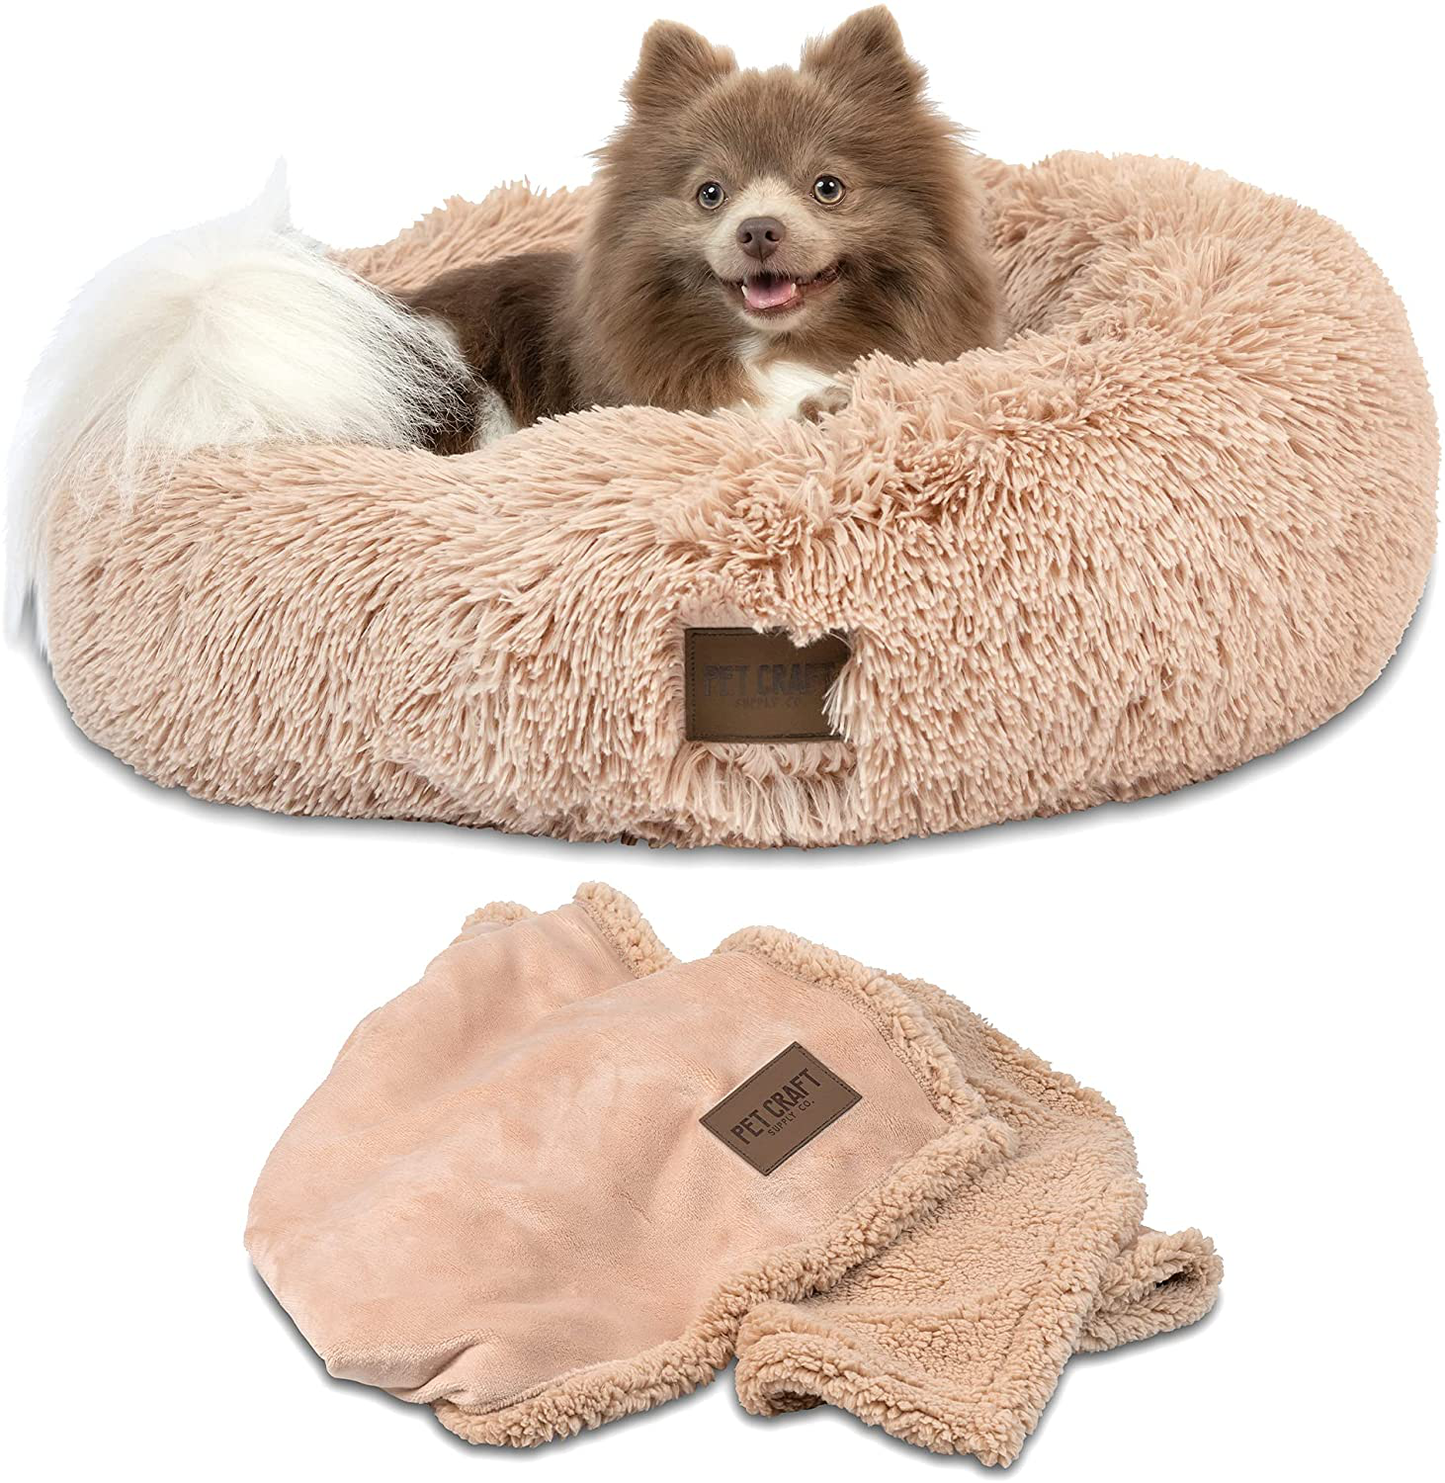 Pet Craft Supply Ultra Plush Calming Anti-Anxiety Pet Bed - Includes Super Soft Comfort Blanket - Great Medium Dog Bed Small Dog Bed Cat Bed Puppy Bed